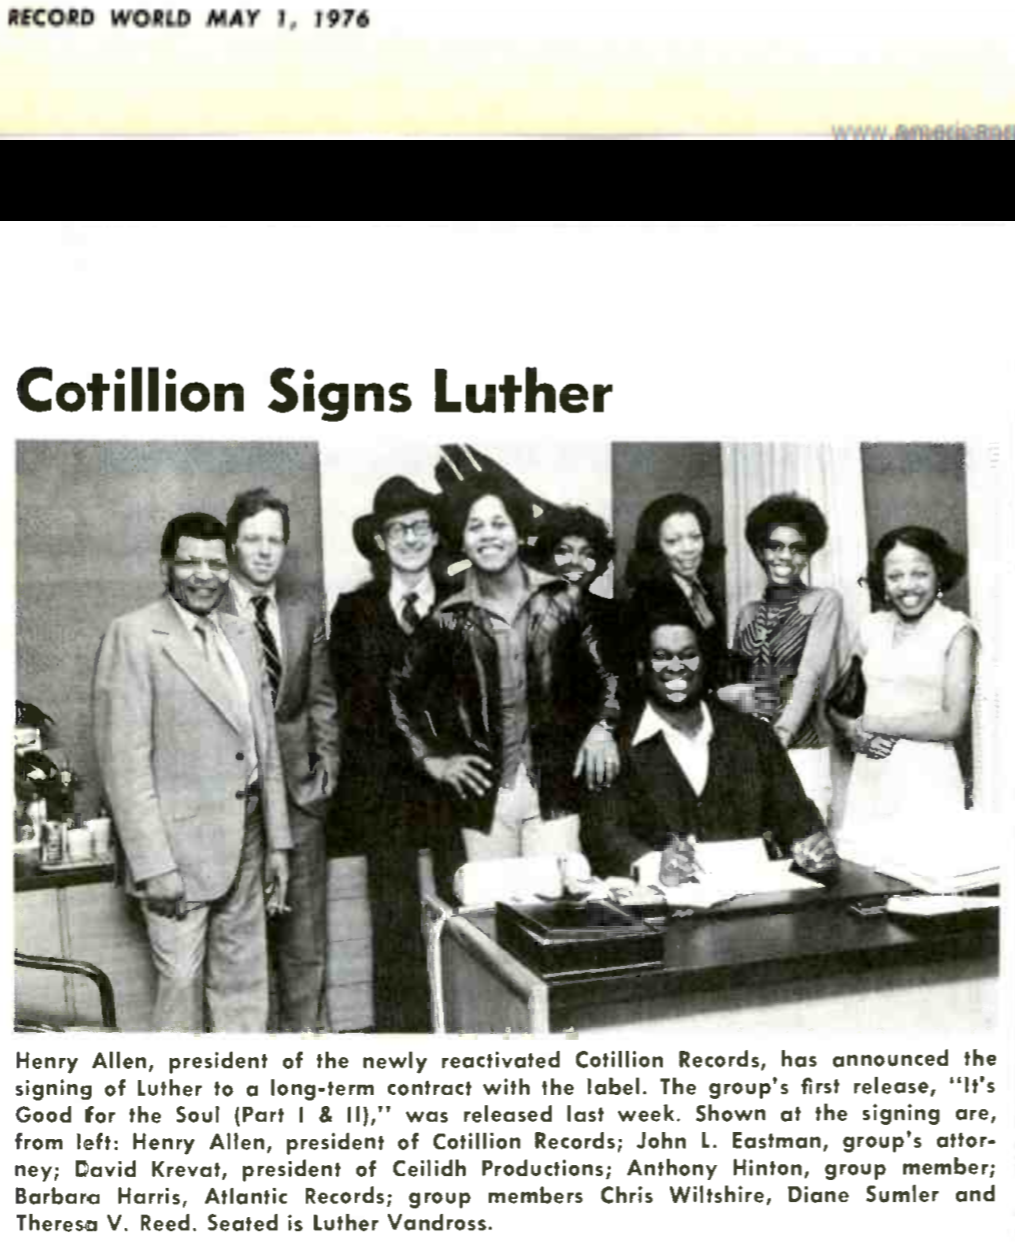 https://fandross.com/wp-content/uploads/2022/06/Cotillion-Signs-Luther.png